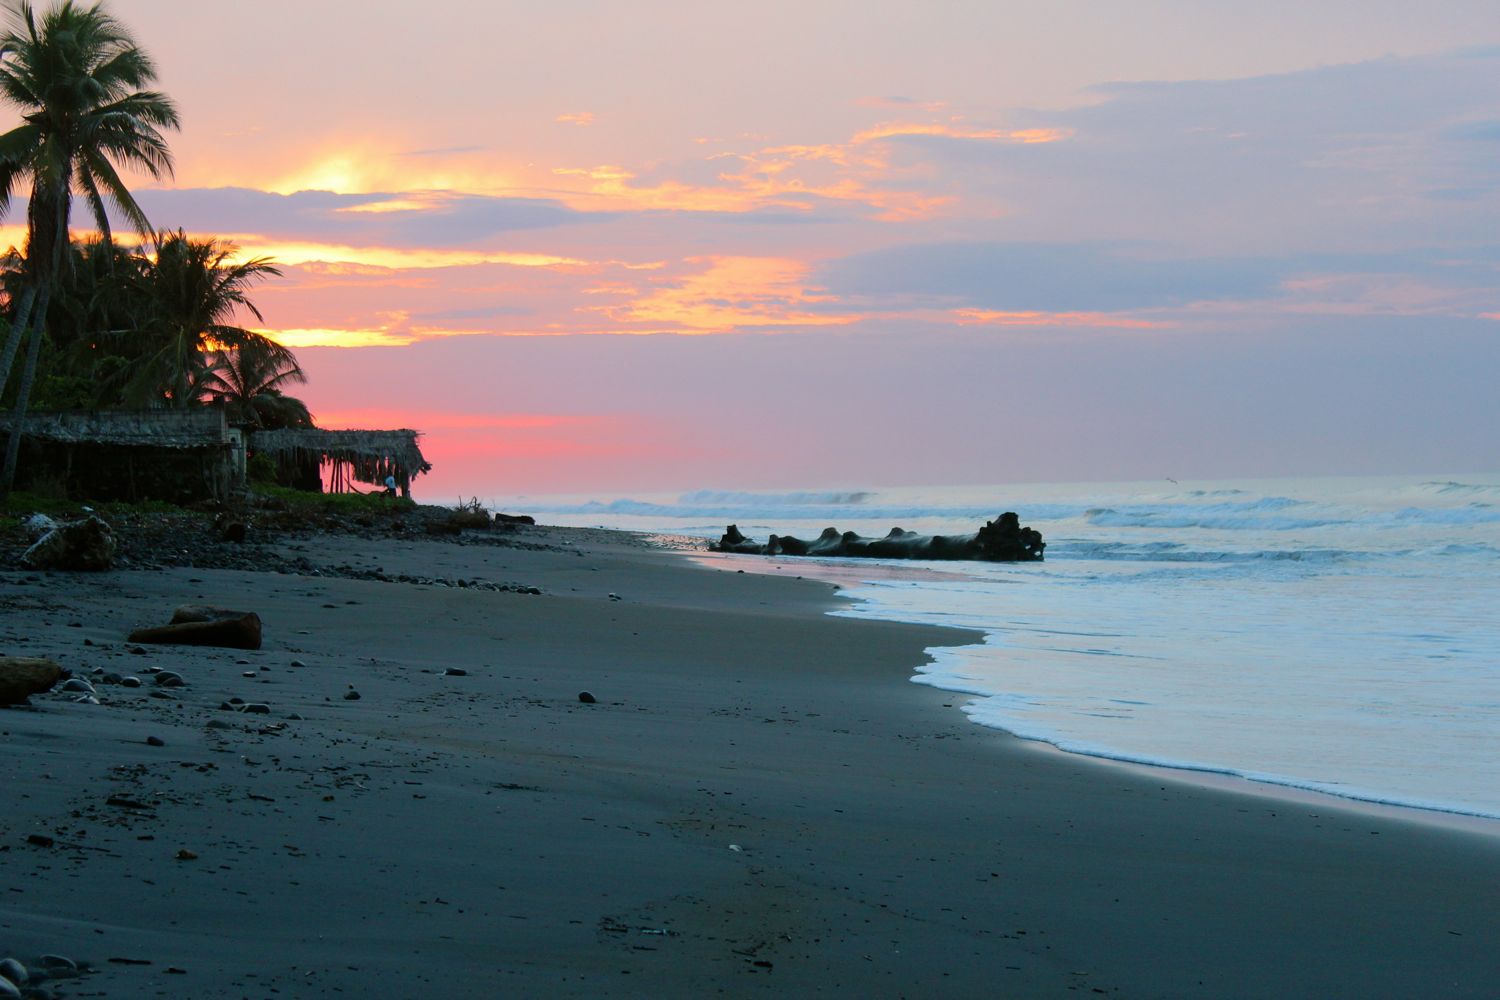 Why We Spent Only One Short Week in El Salvador Part 2 (and Our Next Crazy ...